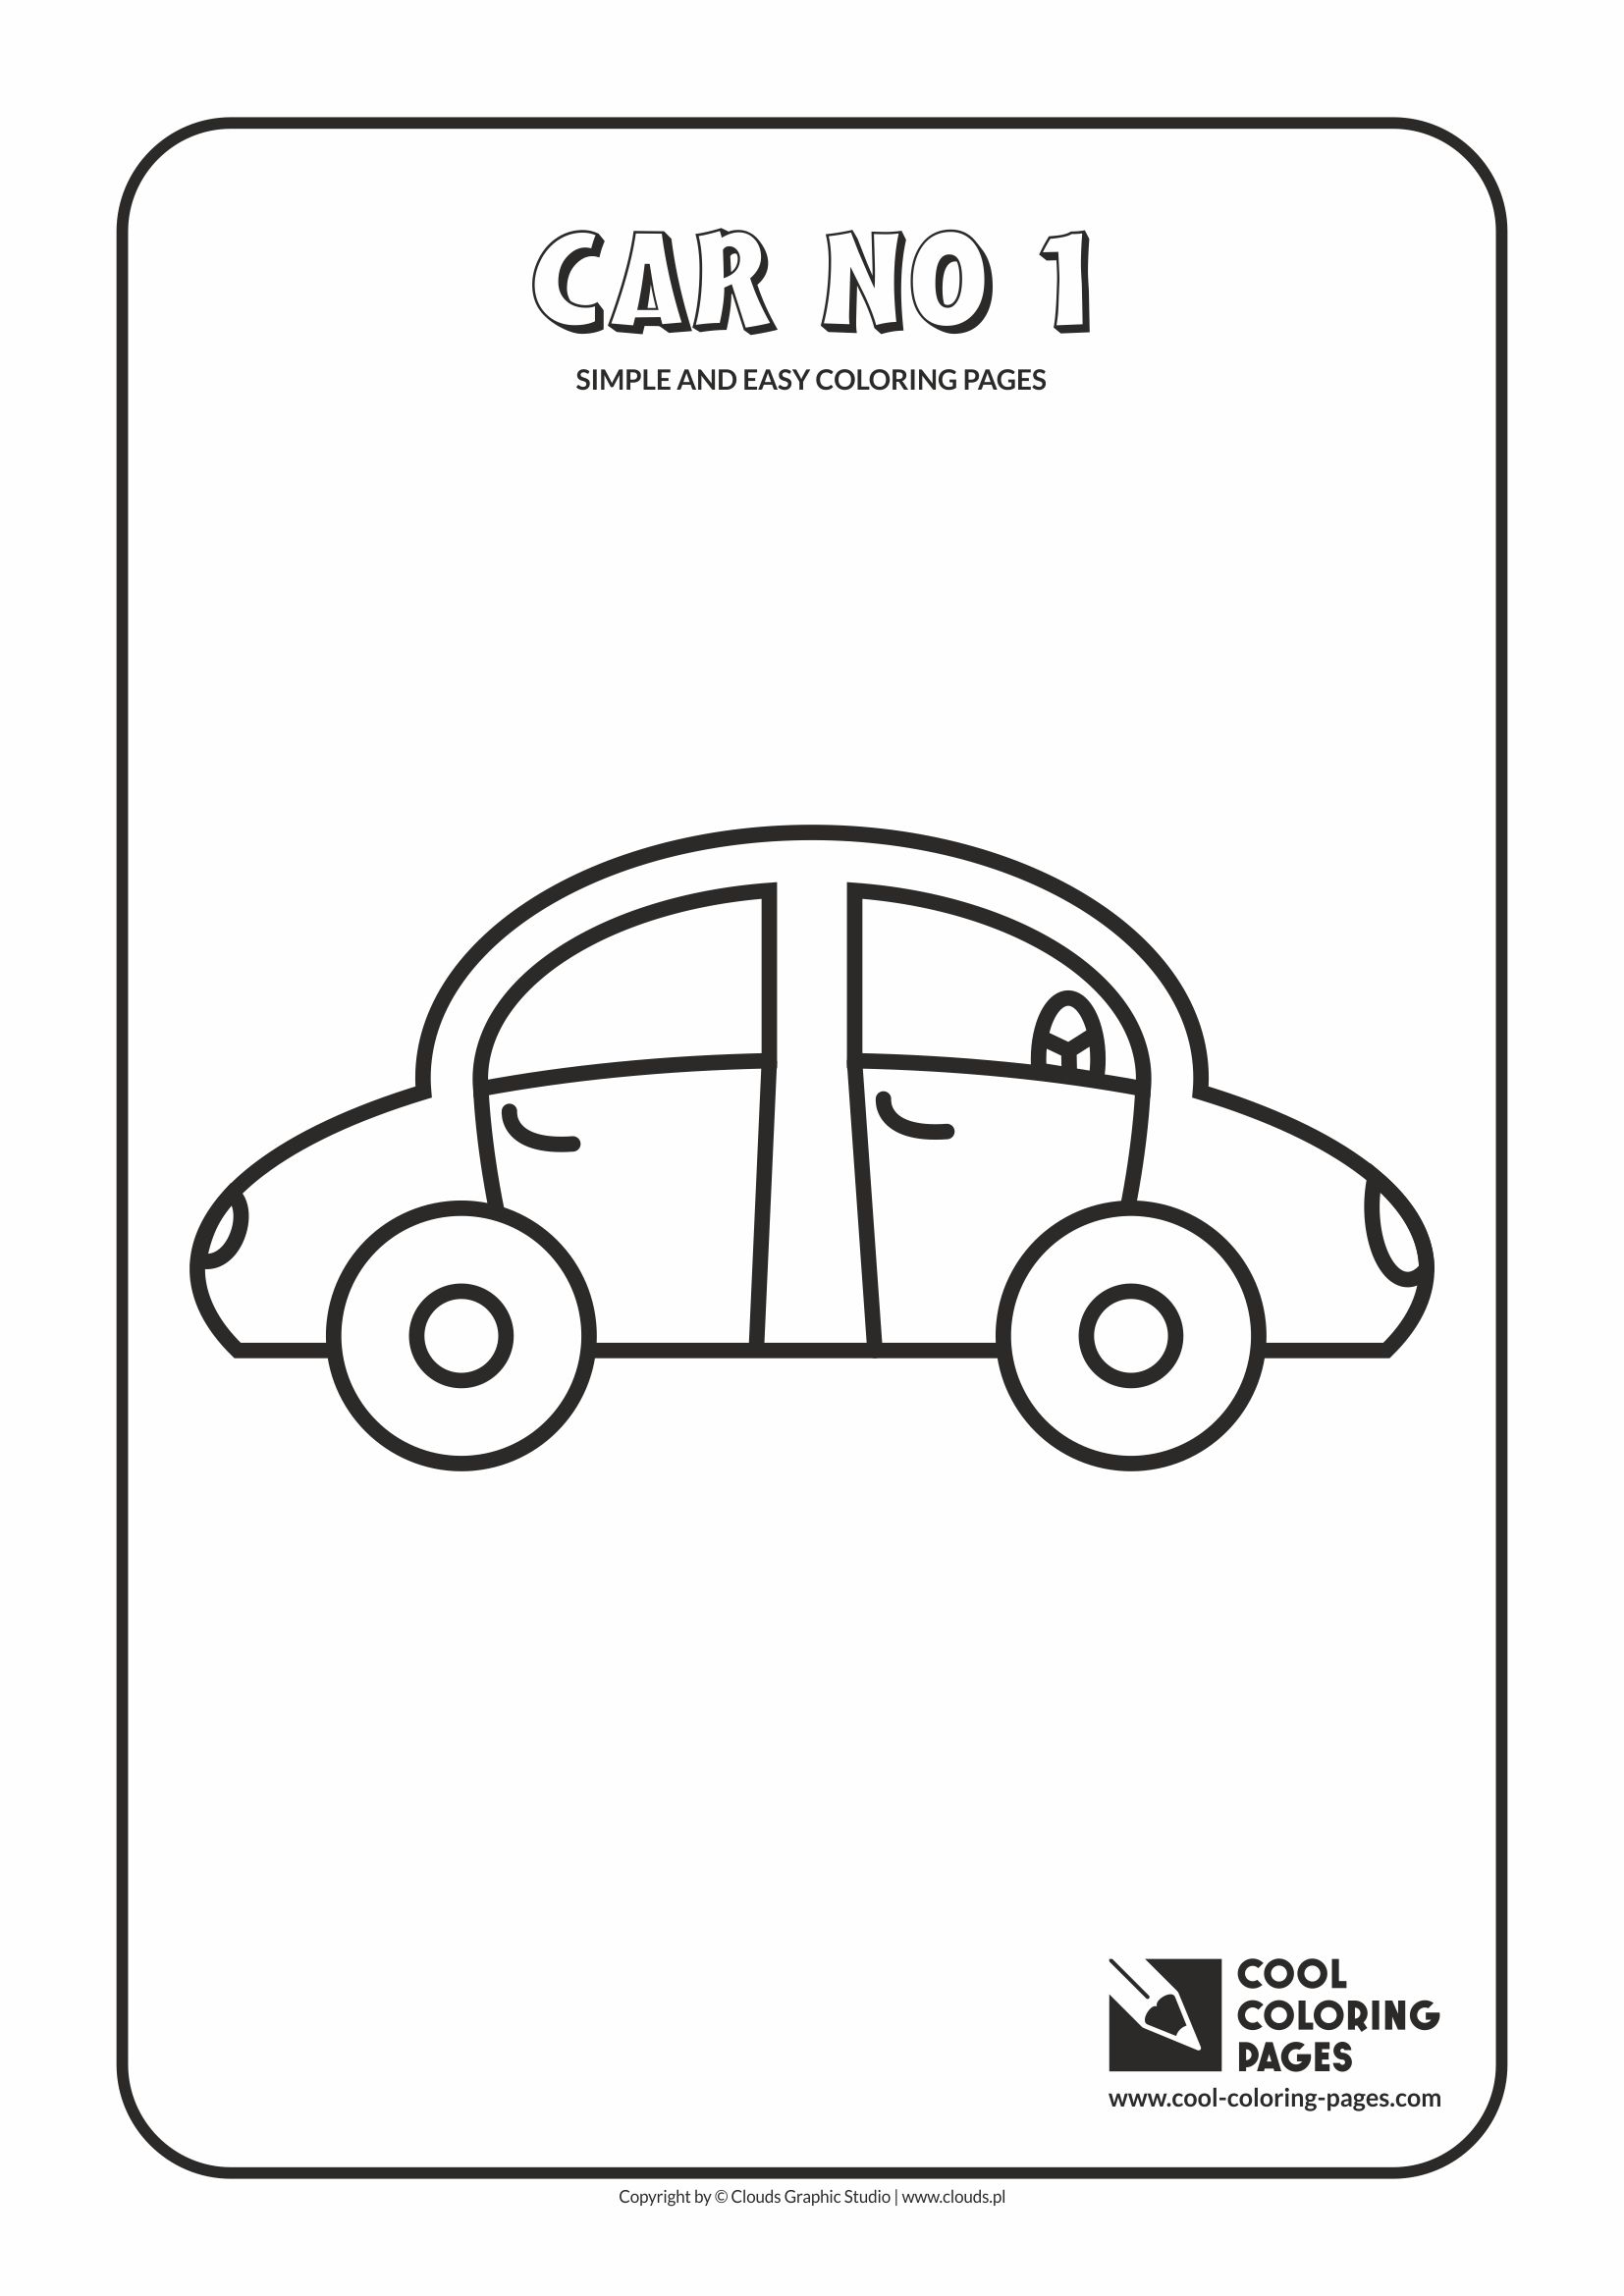 Simple and easy coloring pages for toddlers - Car no 1